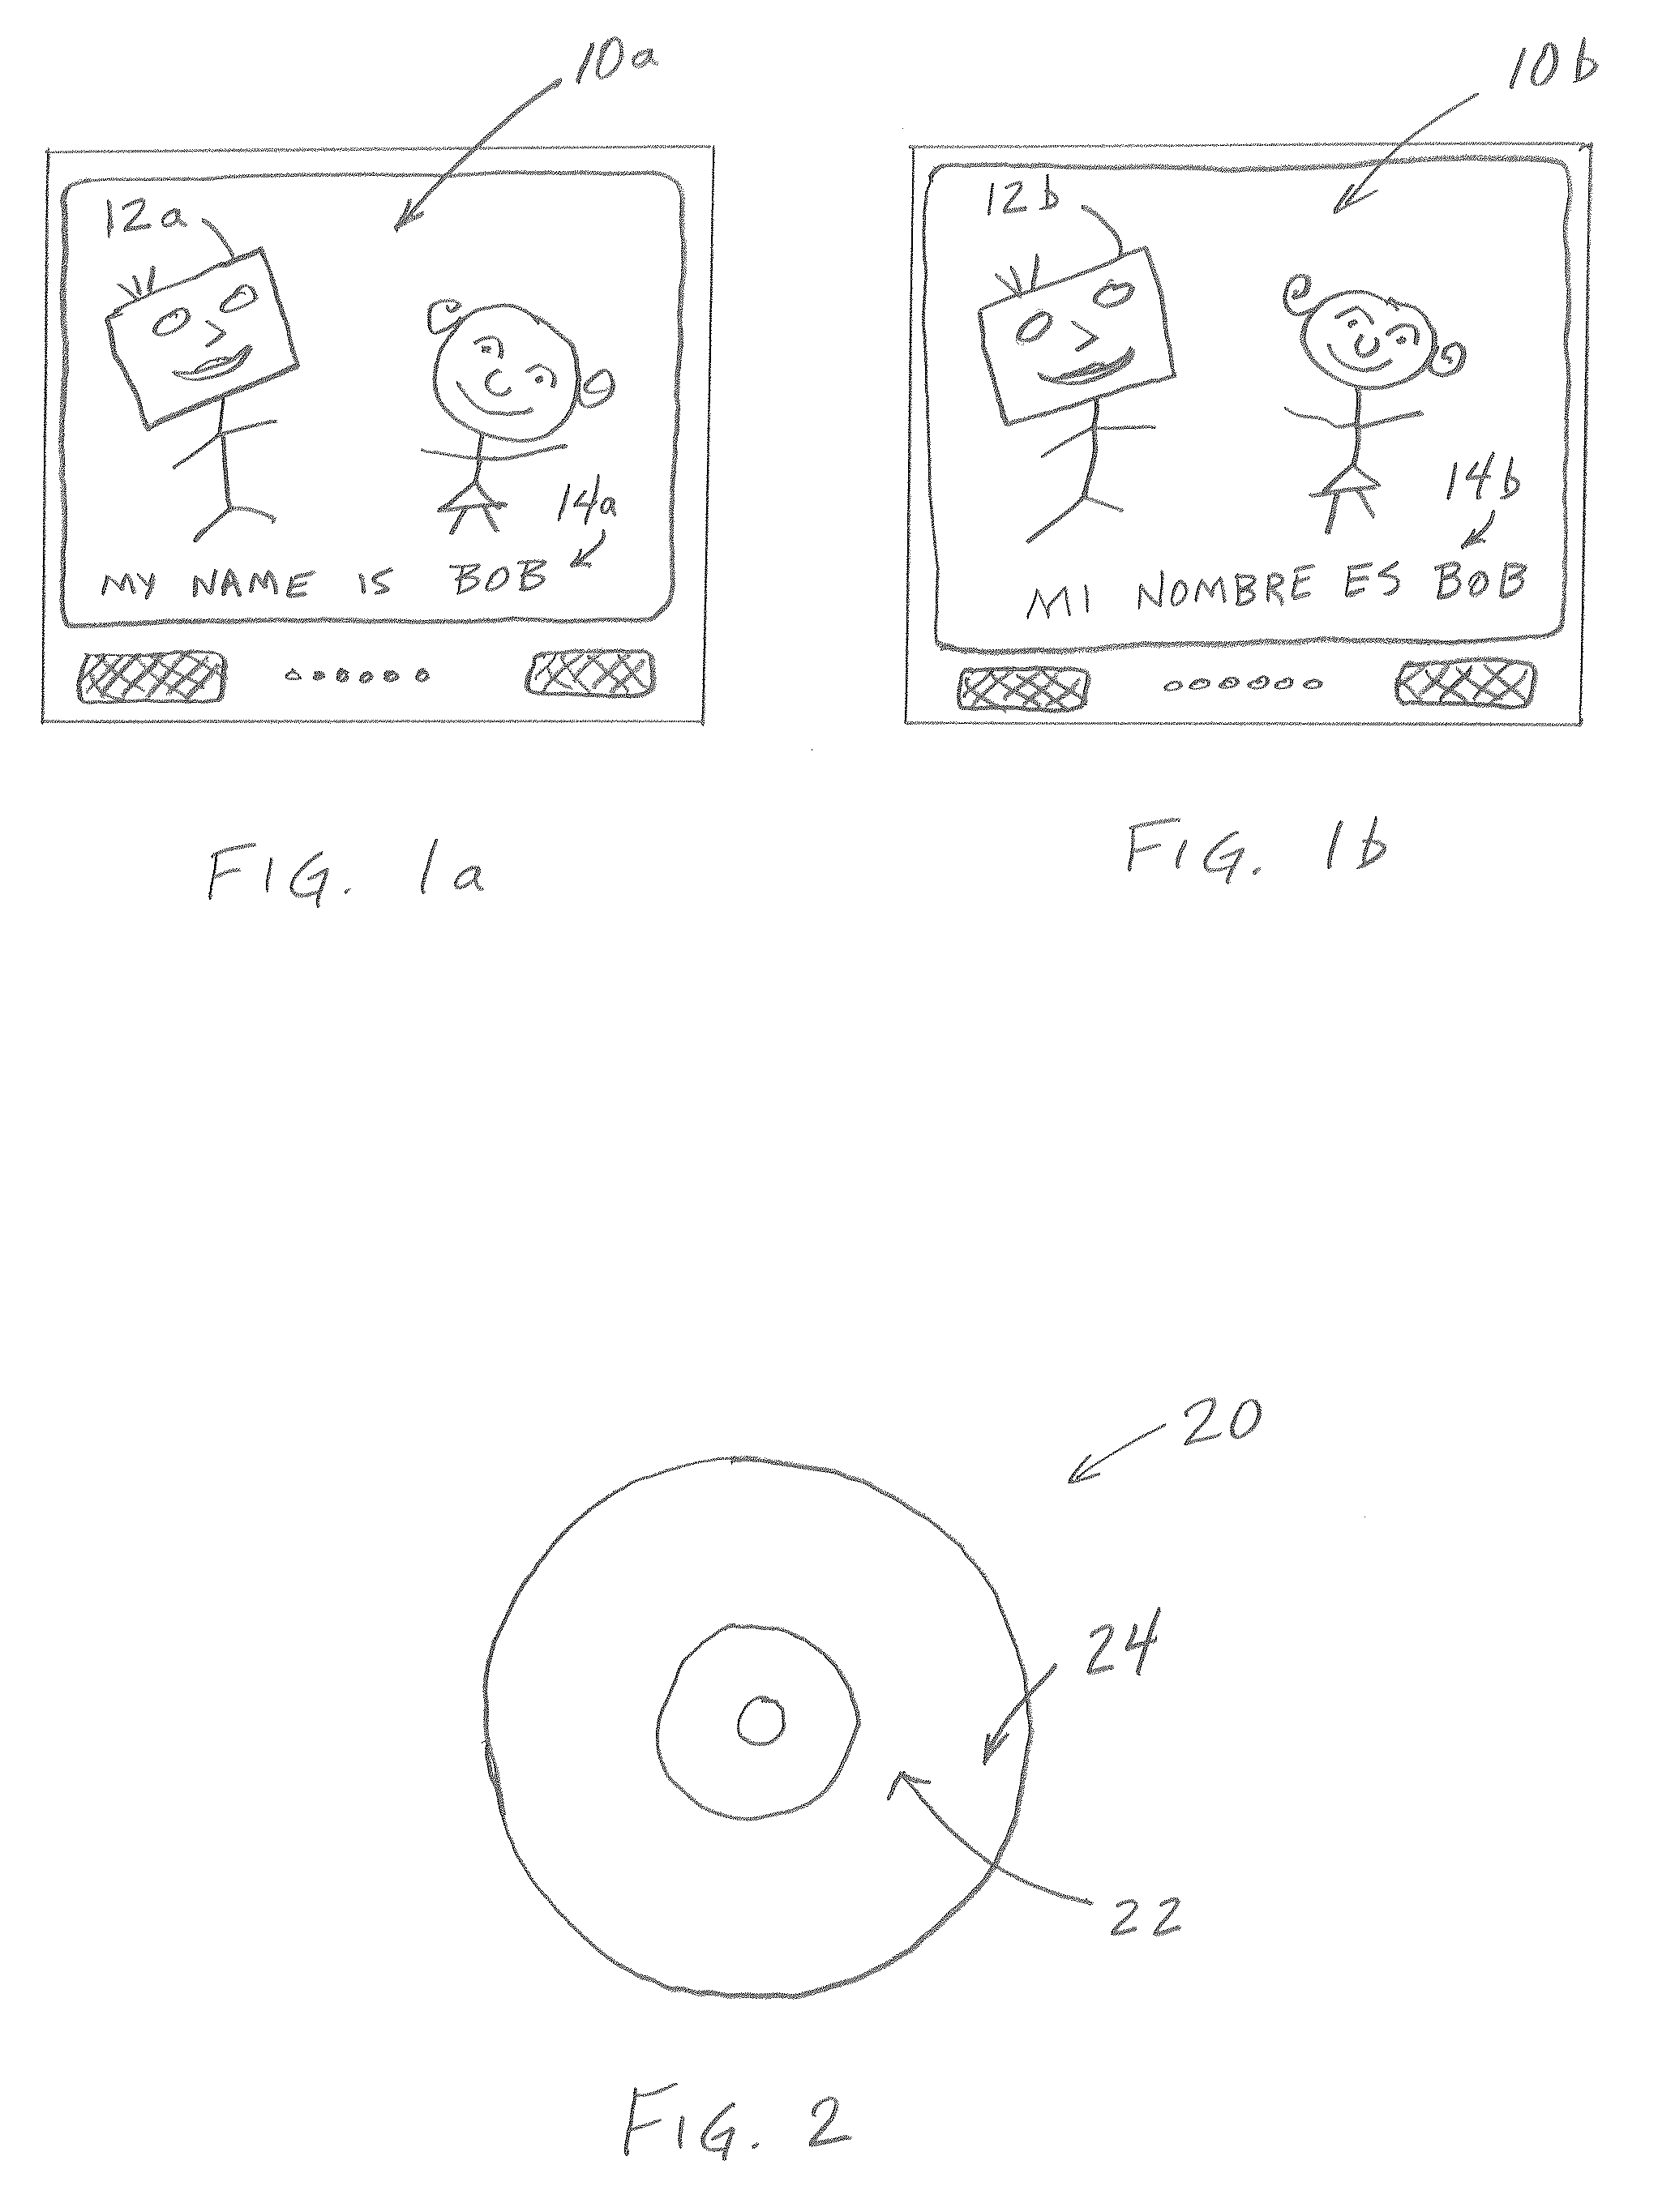 Animation-based system and method for learning a foreign language